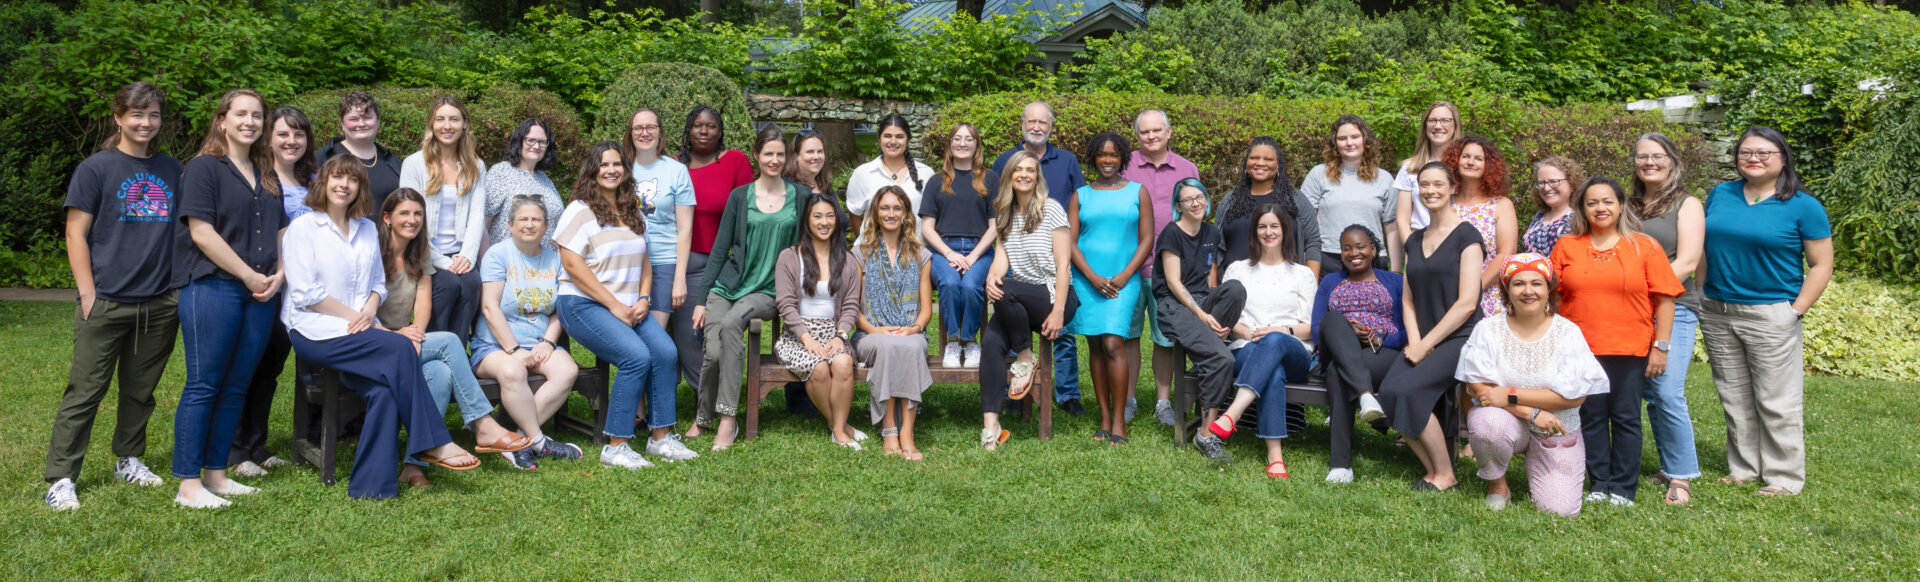 The staff of Population Connection poses together in two rows, outdoors on a lawn, in front of a backdrop of greenery.